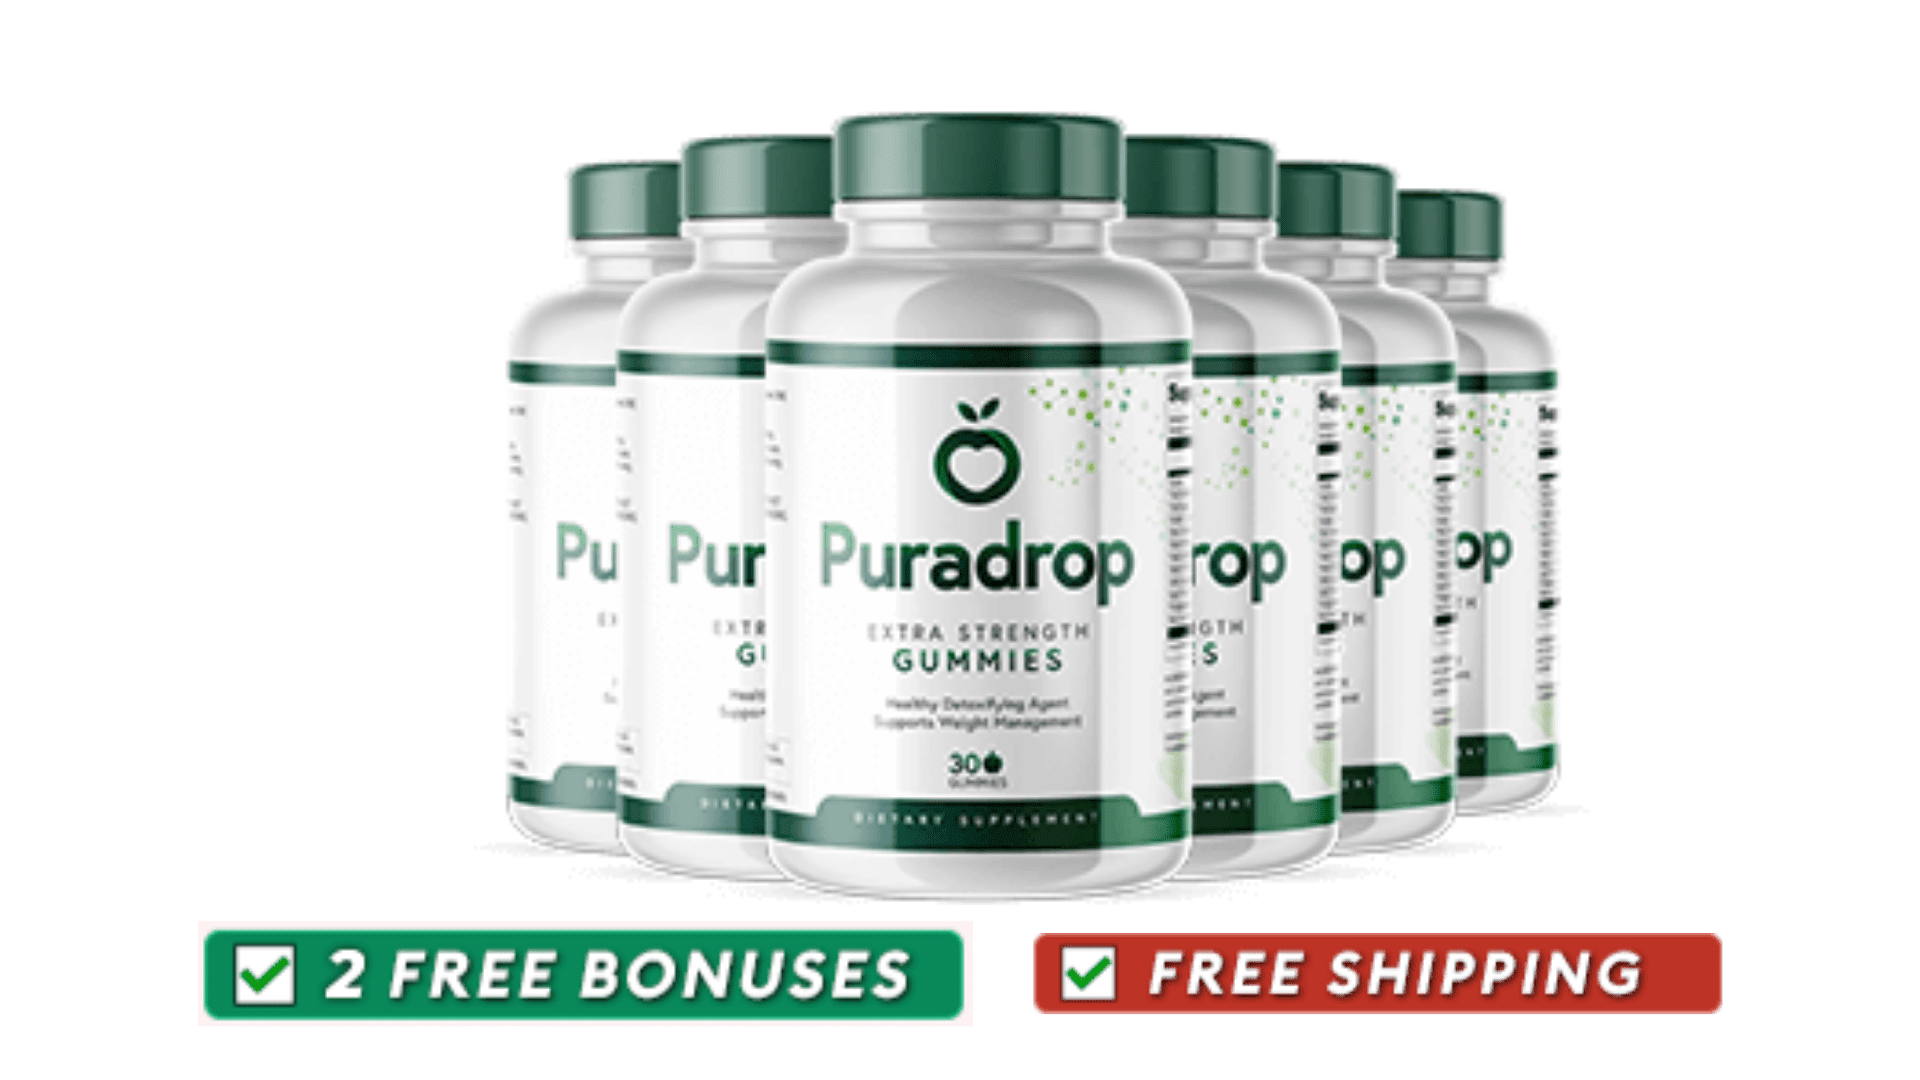 order puradrop discounted bottle now!